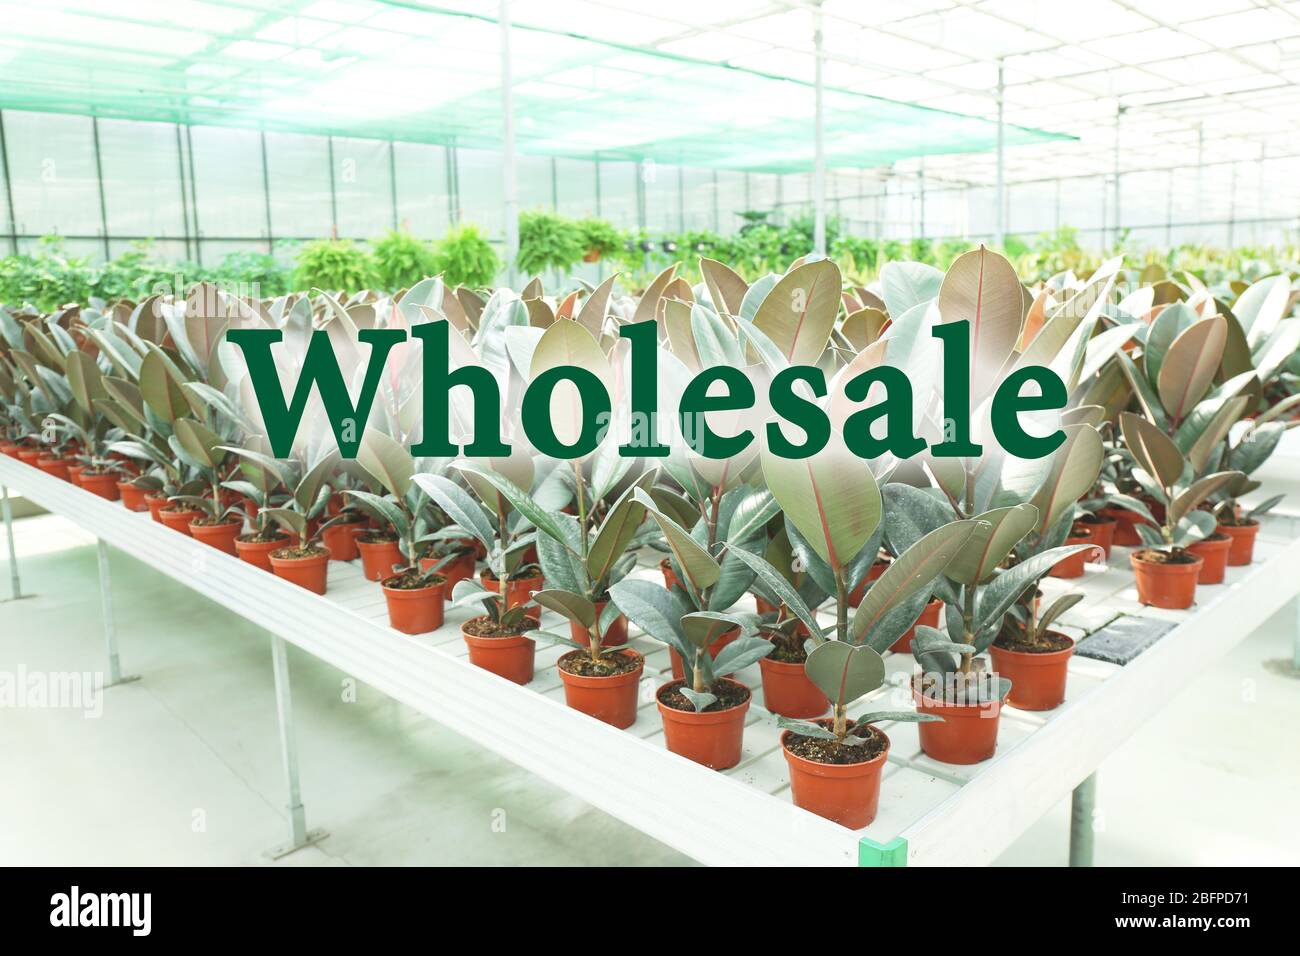 Wholesale concept. Huge greenhouse with lot of flowers and plants for sale Stock Photo